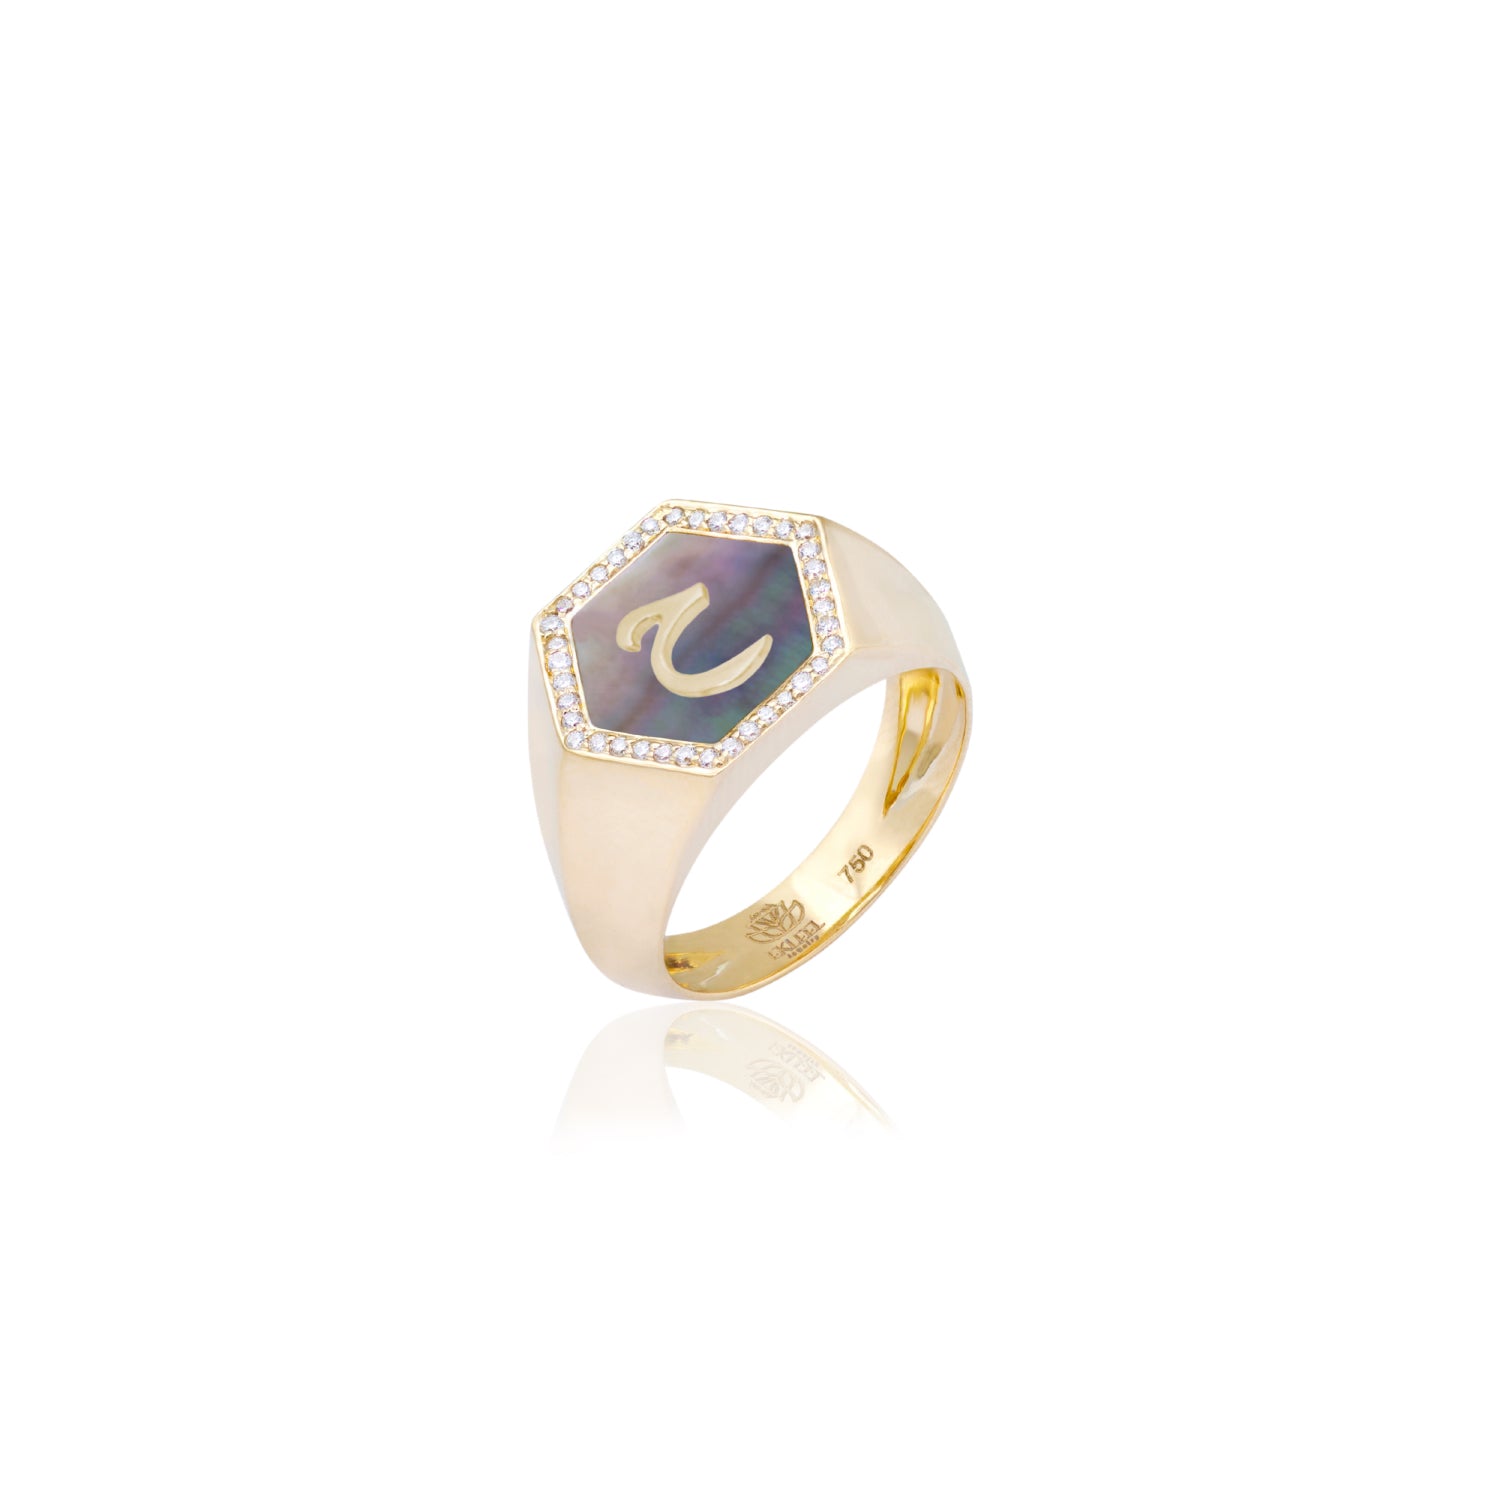 Qamoos 2.0 Letter ح Black Mother of Pearl and Diamond Signet Ring in Yellow Gold